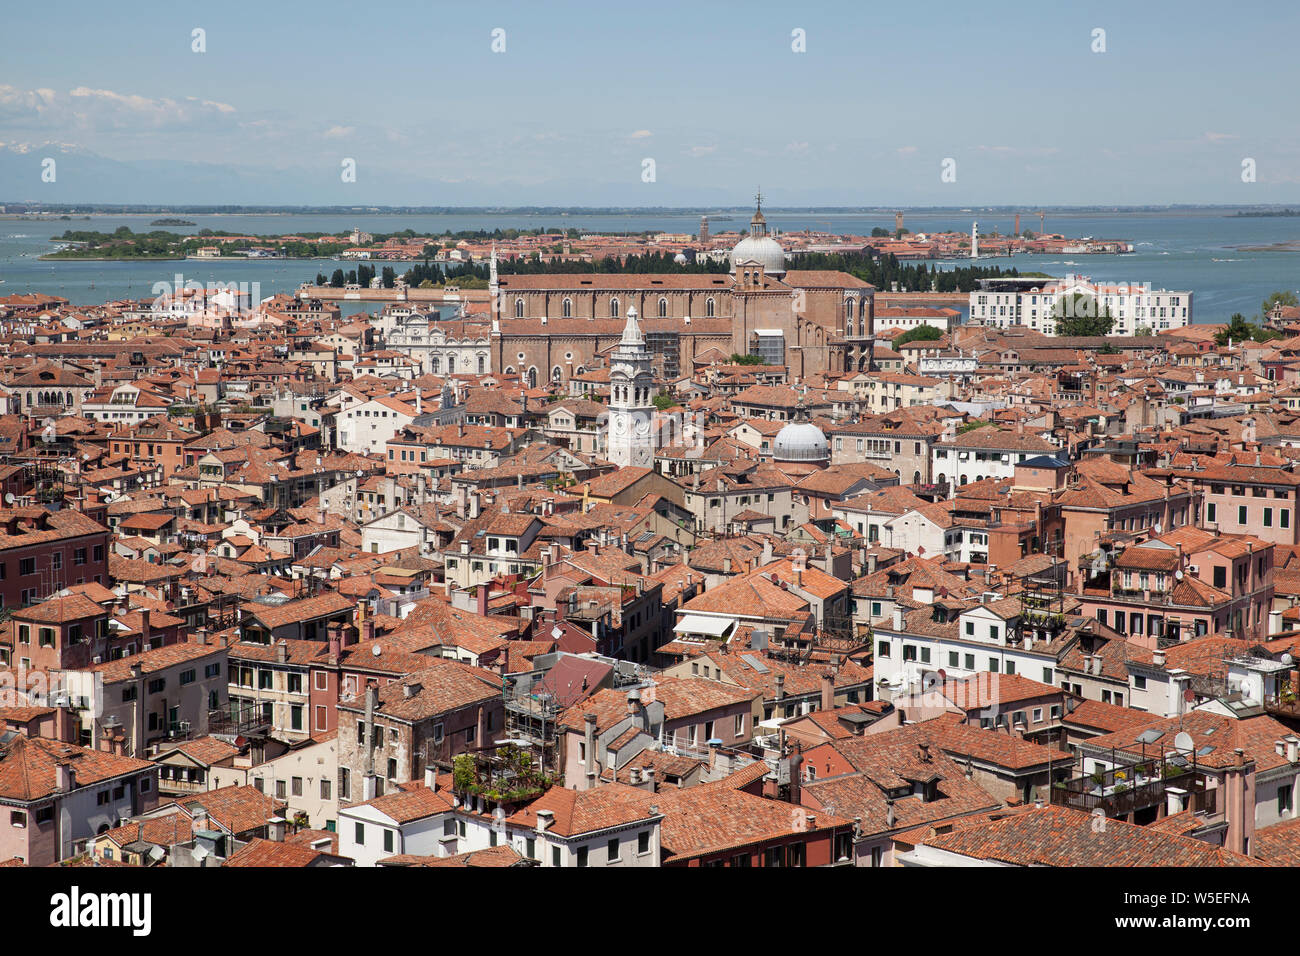 The view from the top of Campanile di San Marco in Piazza San Marco, Venice.St Mark's Campanile is the bell tower of St Mark's Basilica in Venice. Stock Photo